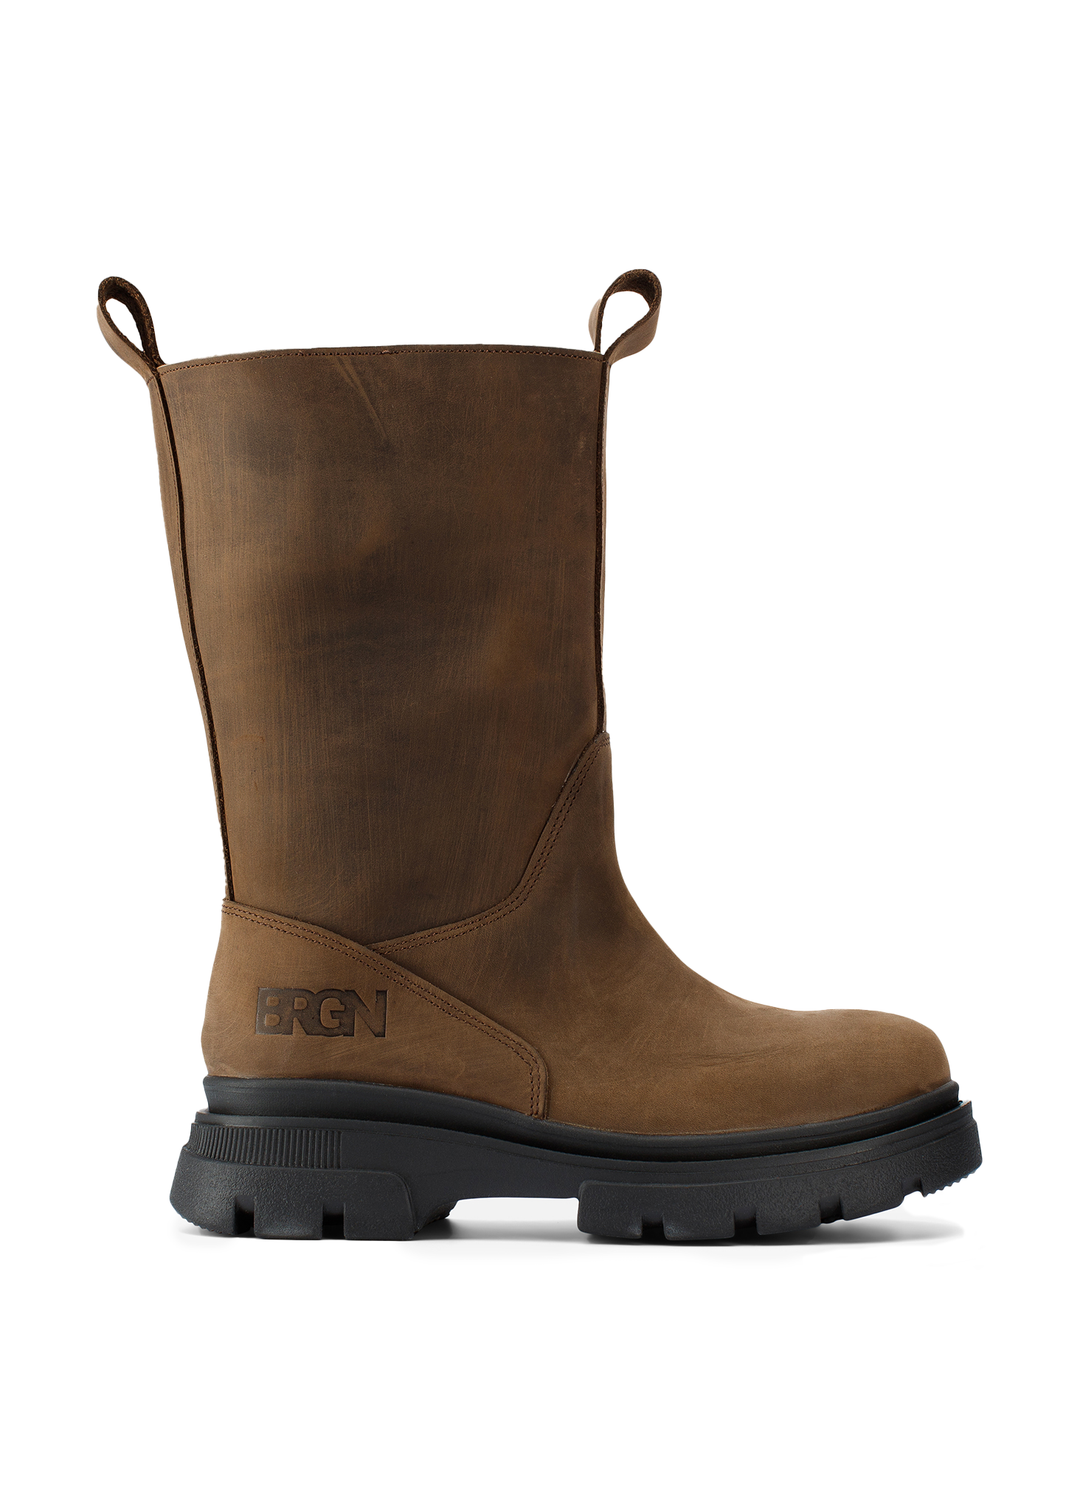 BRGN by Lunde & Gaundal Biker Boots Shoes 185 Brown